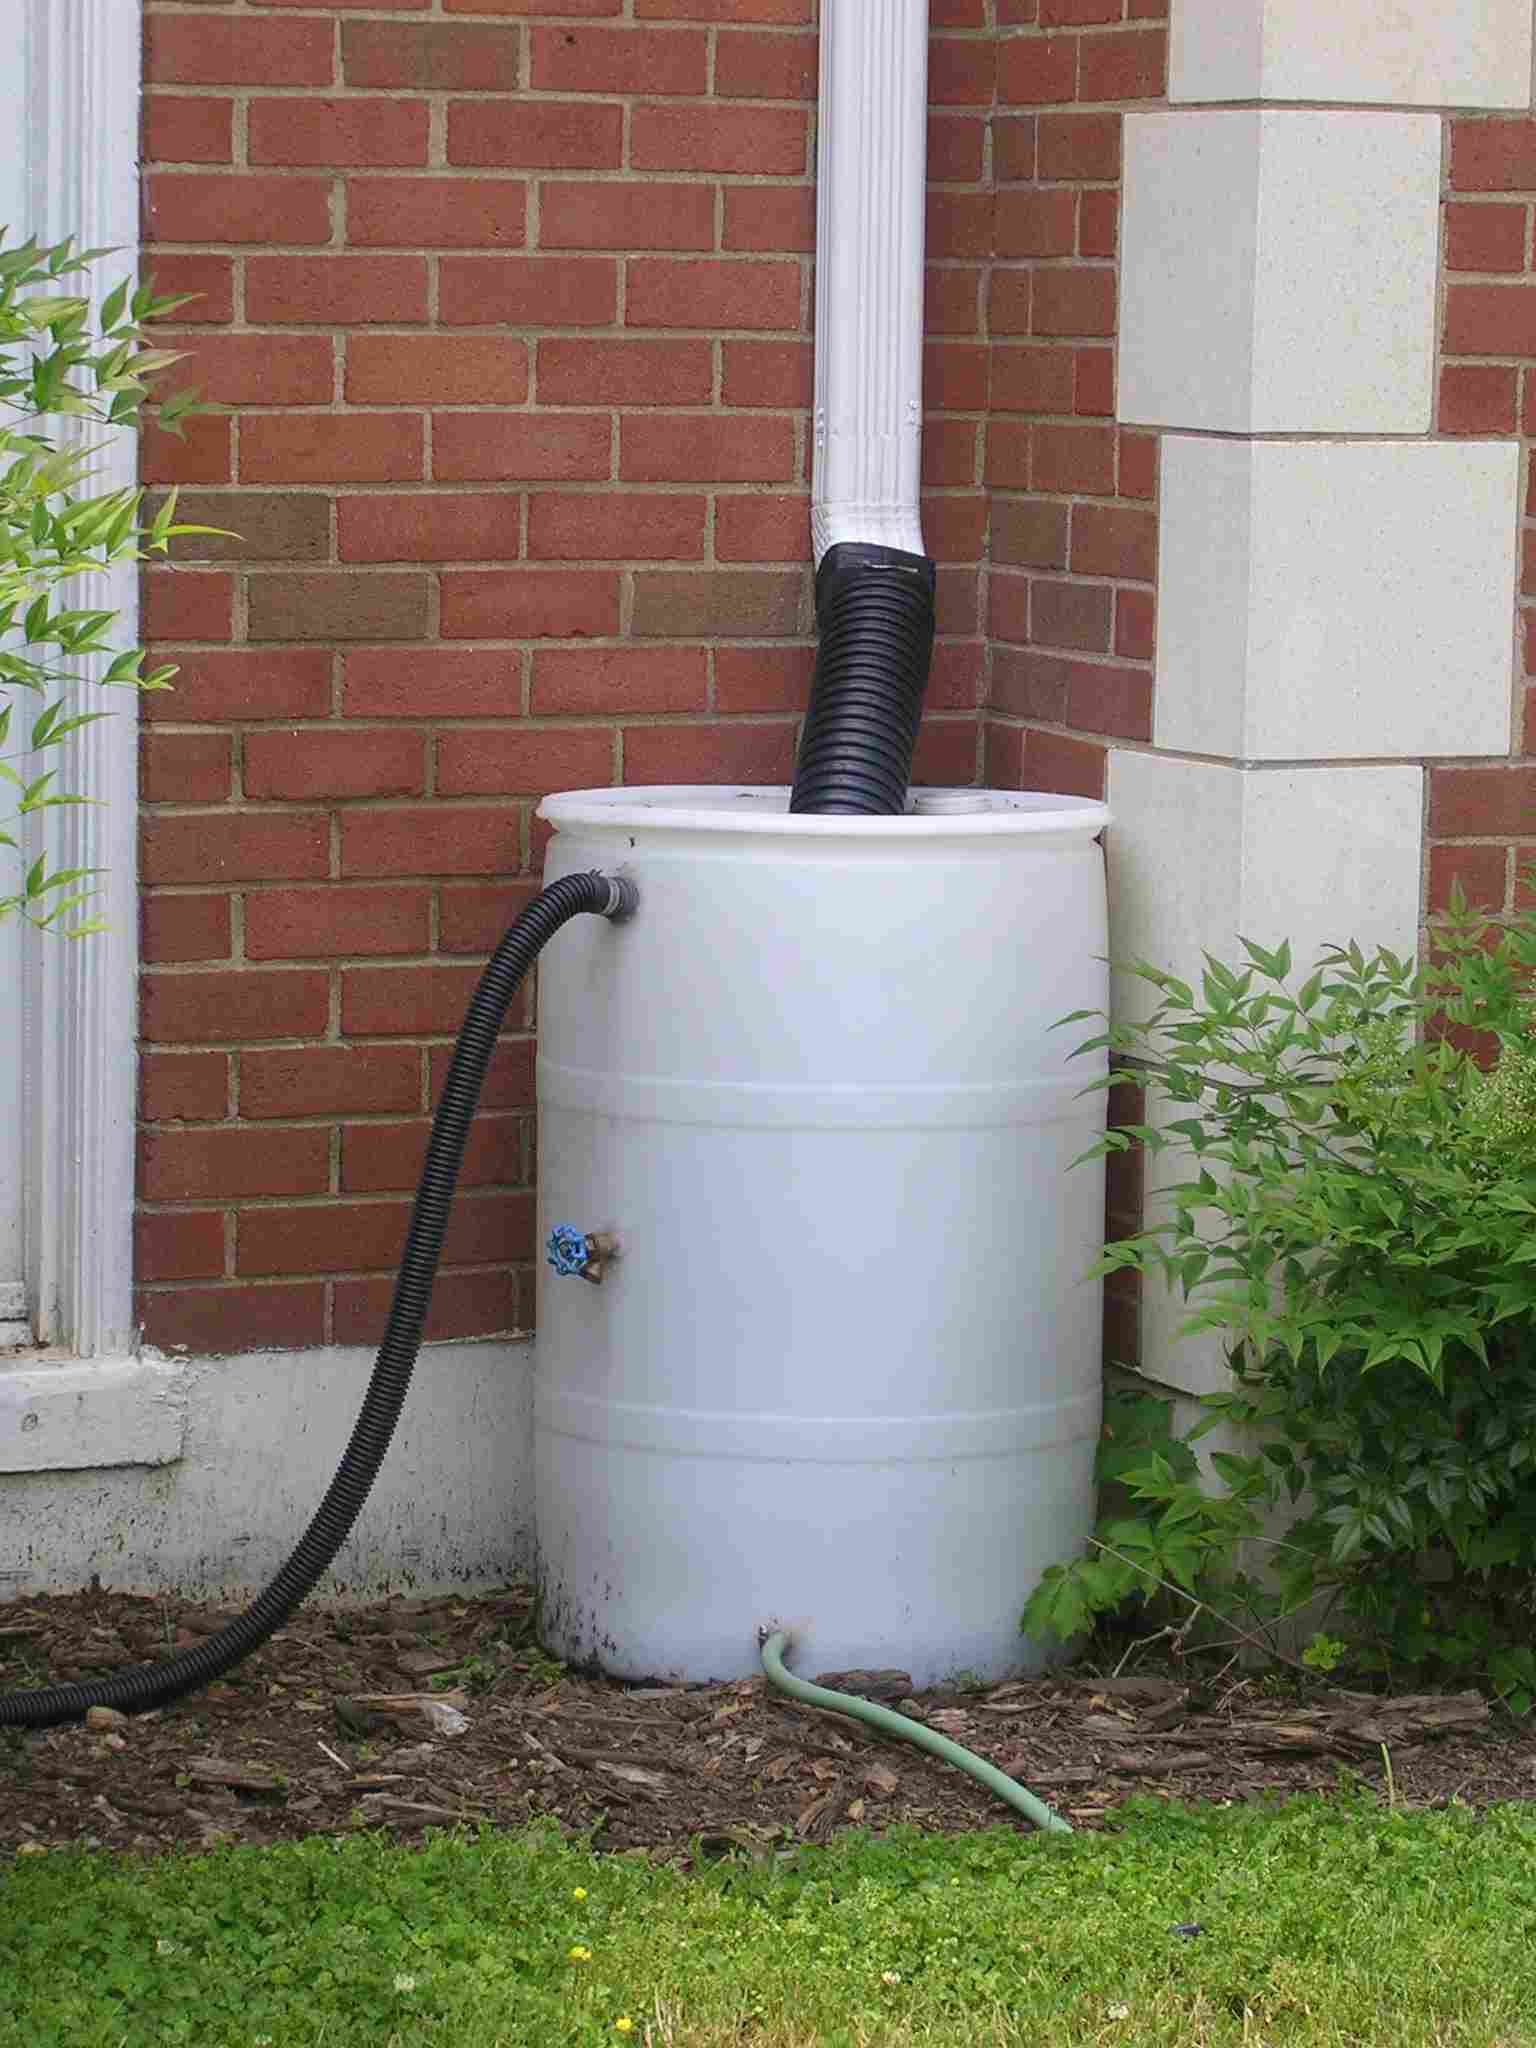 Downspout connected to rain barrel